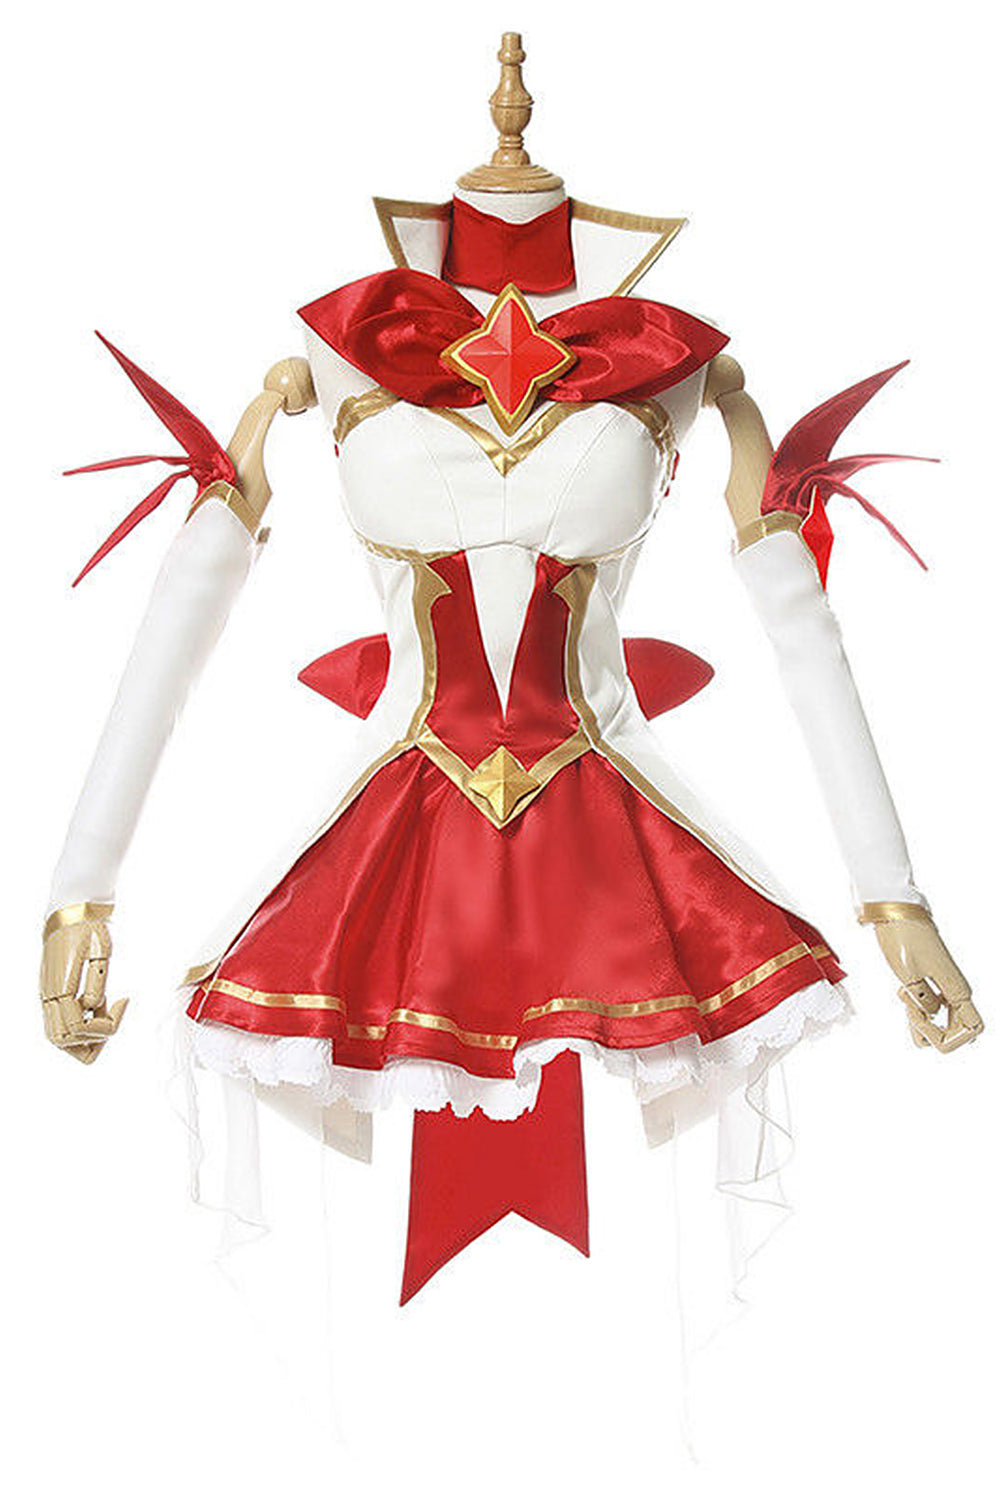 LOL League of Legends Star Guardian Miss Fortune Cosplay Costume